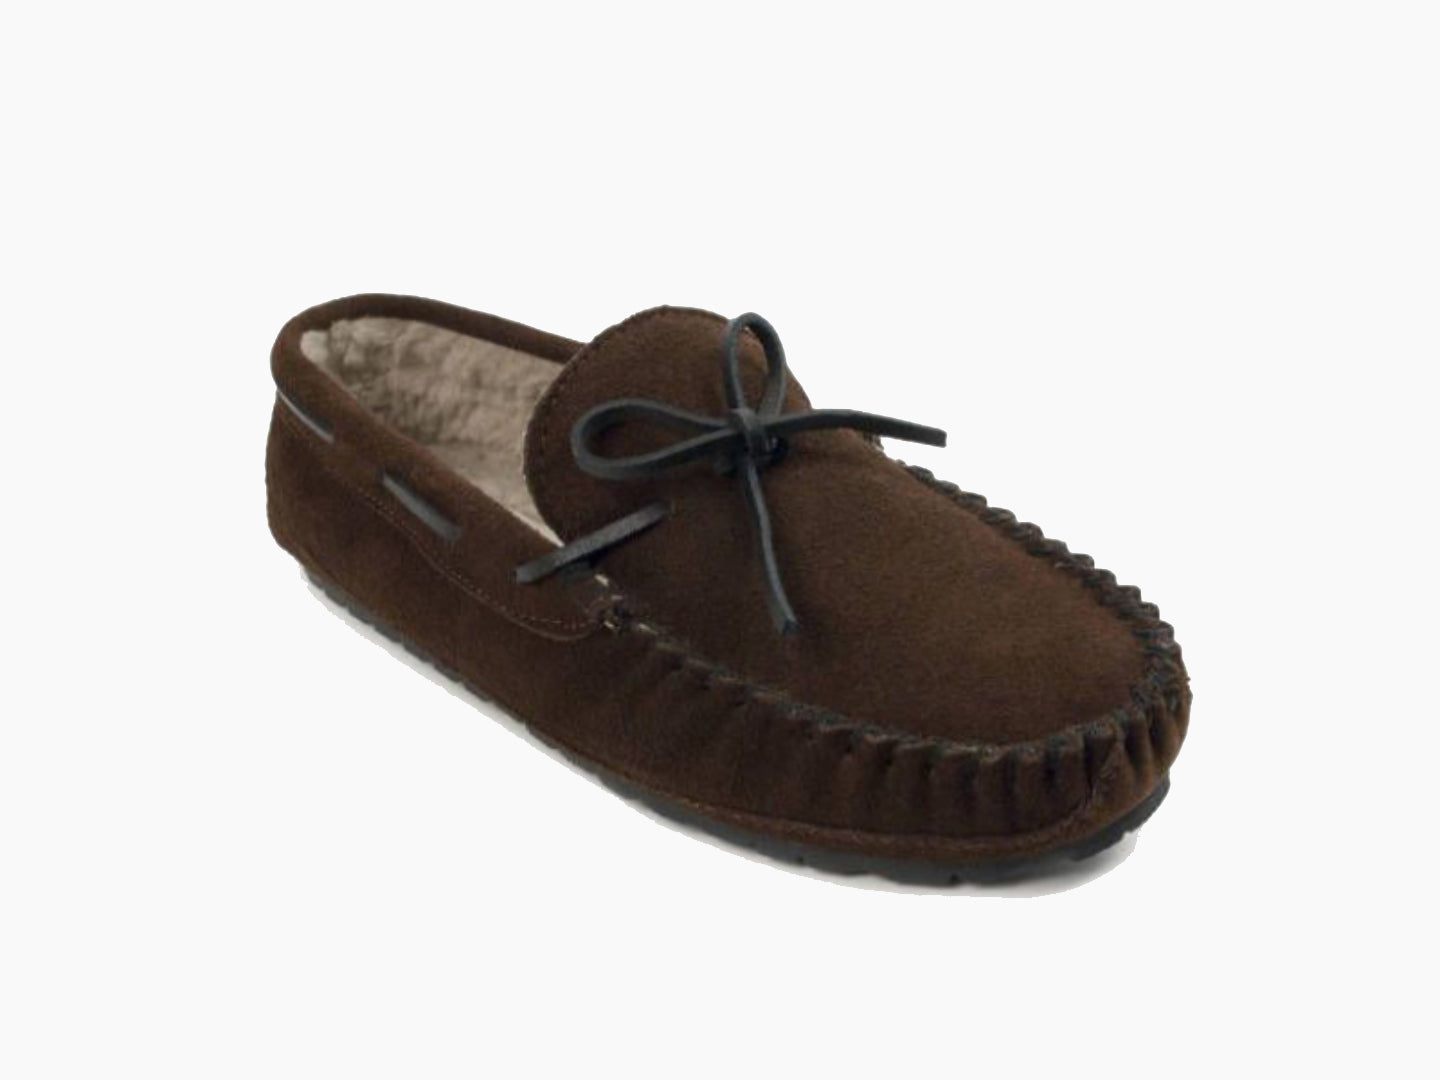 Casey Slipper in Chocolate from 3/4 Angle View